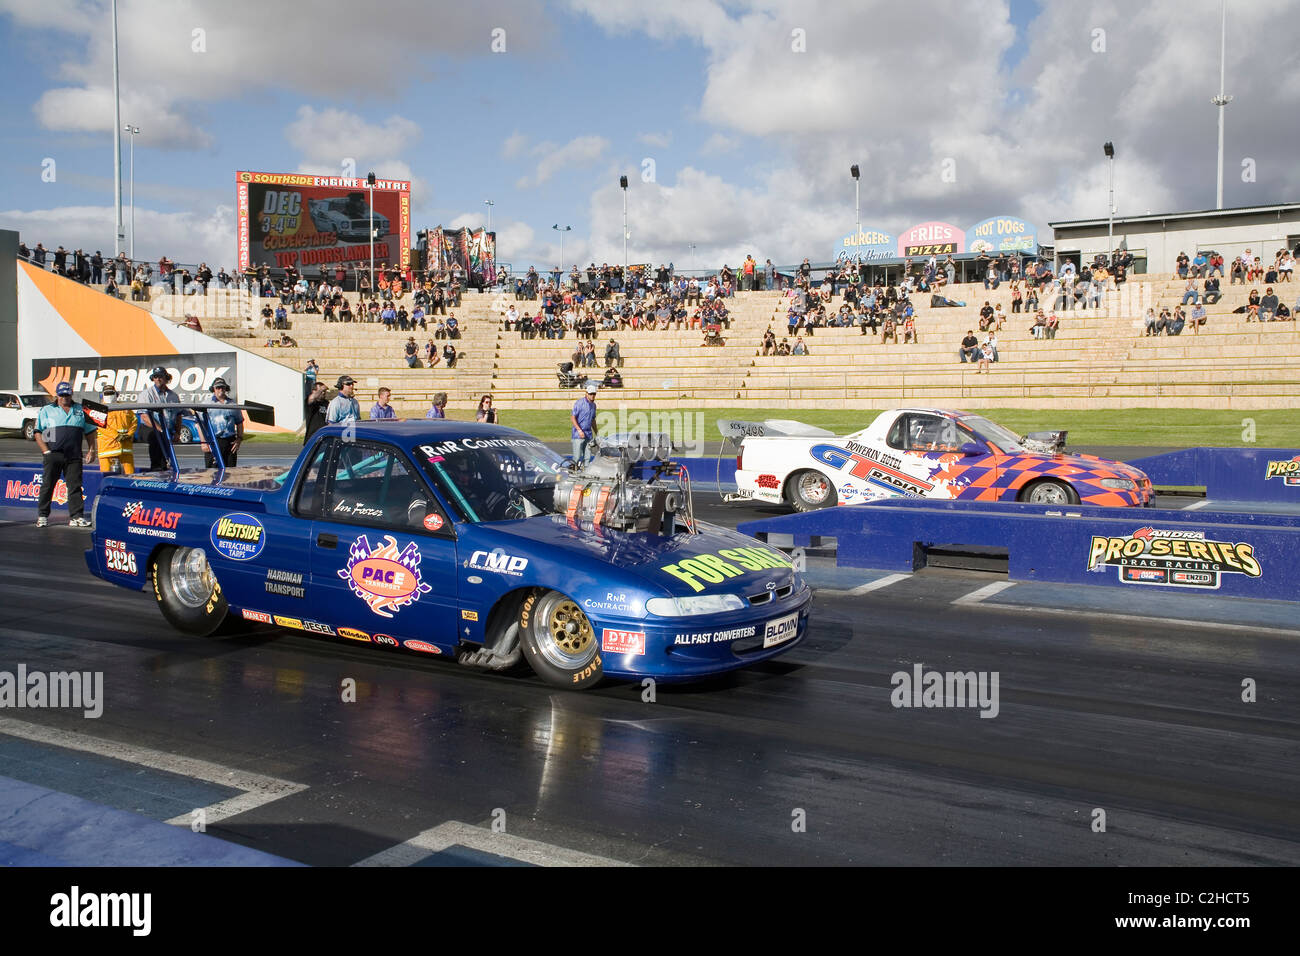 Two heavily modified and supercharged Australian Holden ute drag racing cars line up to race on the quarter mile drag strip Stock Photo